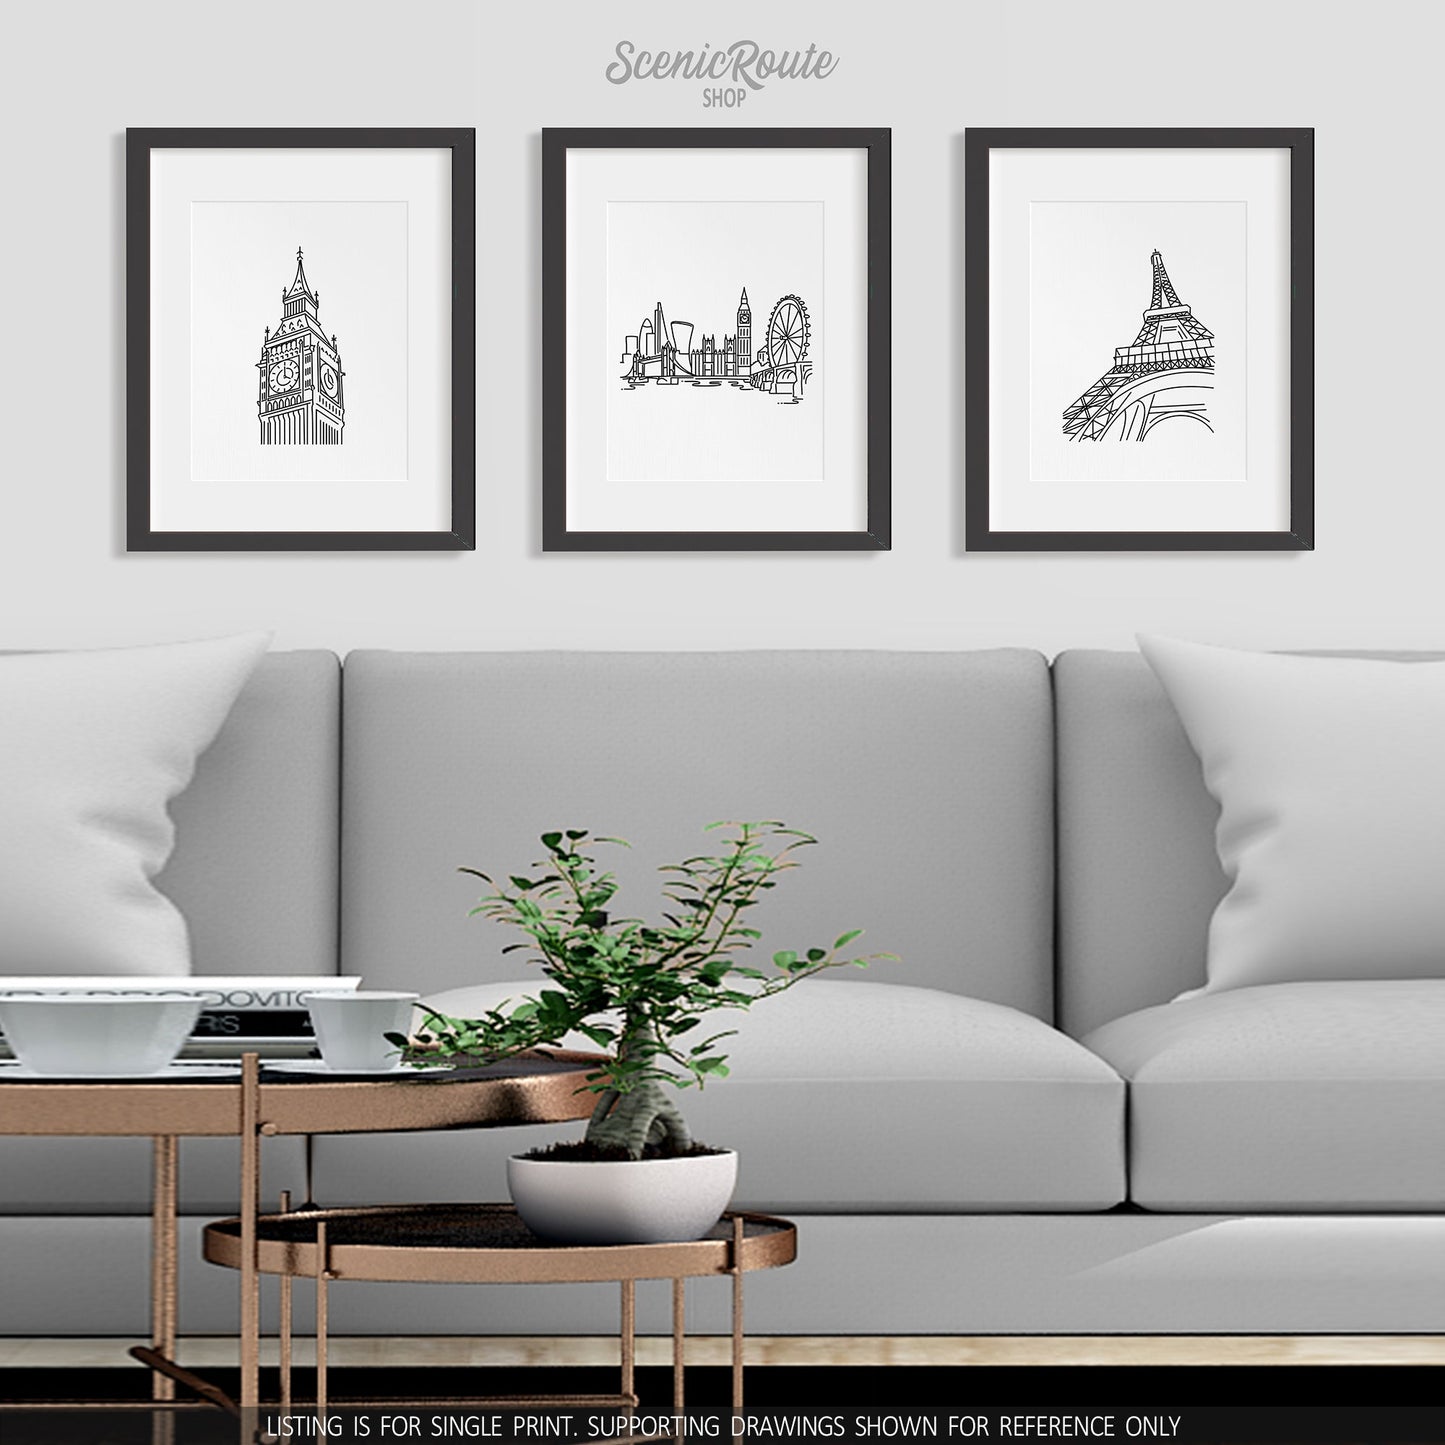 A group of three framed drawings on a wall above a couch. The line art drawings include Big Ben, London Skyline, and Eiffel Tower